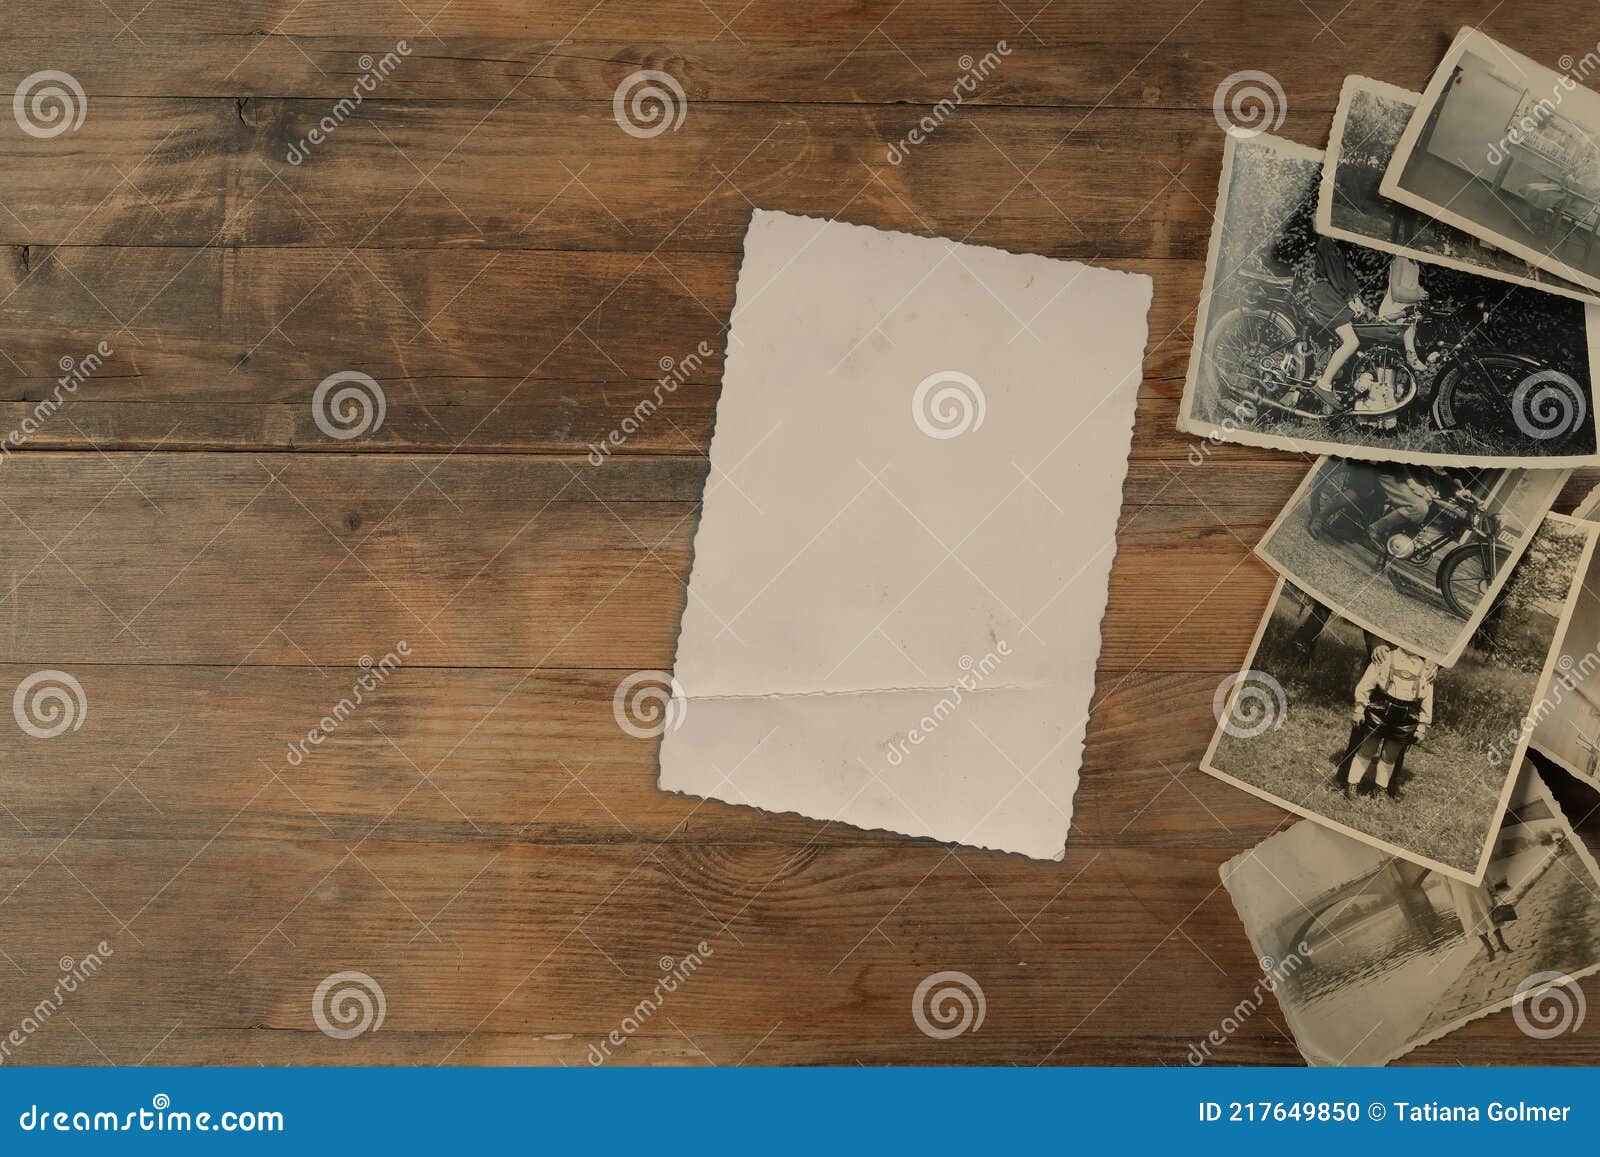 stack of old vintage monochrome photographs on photographic paper on natural wood background, concept of genealogy, memory of